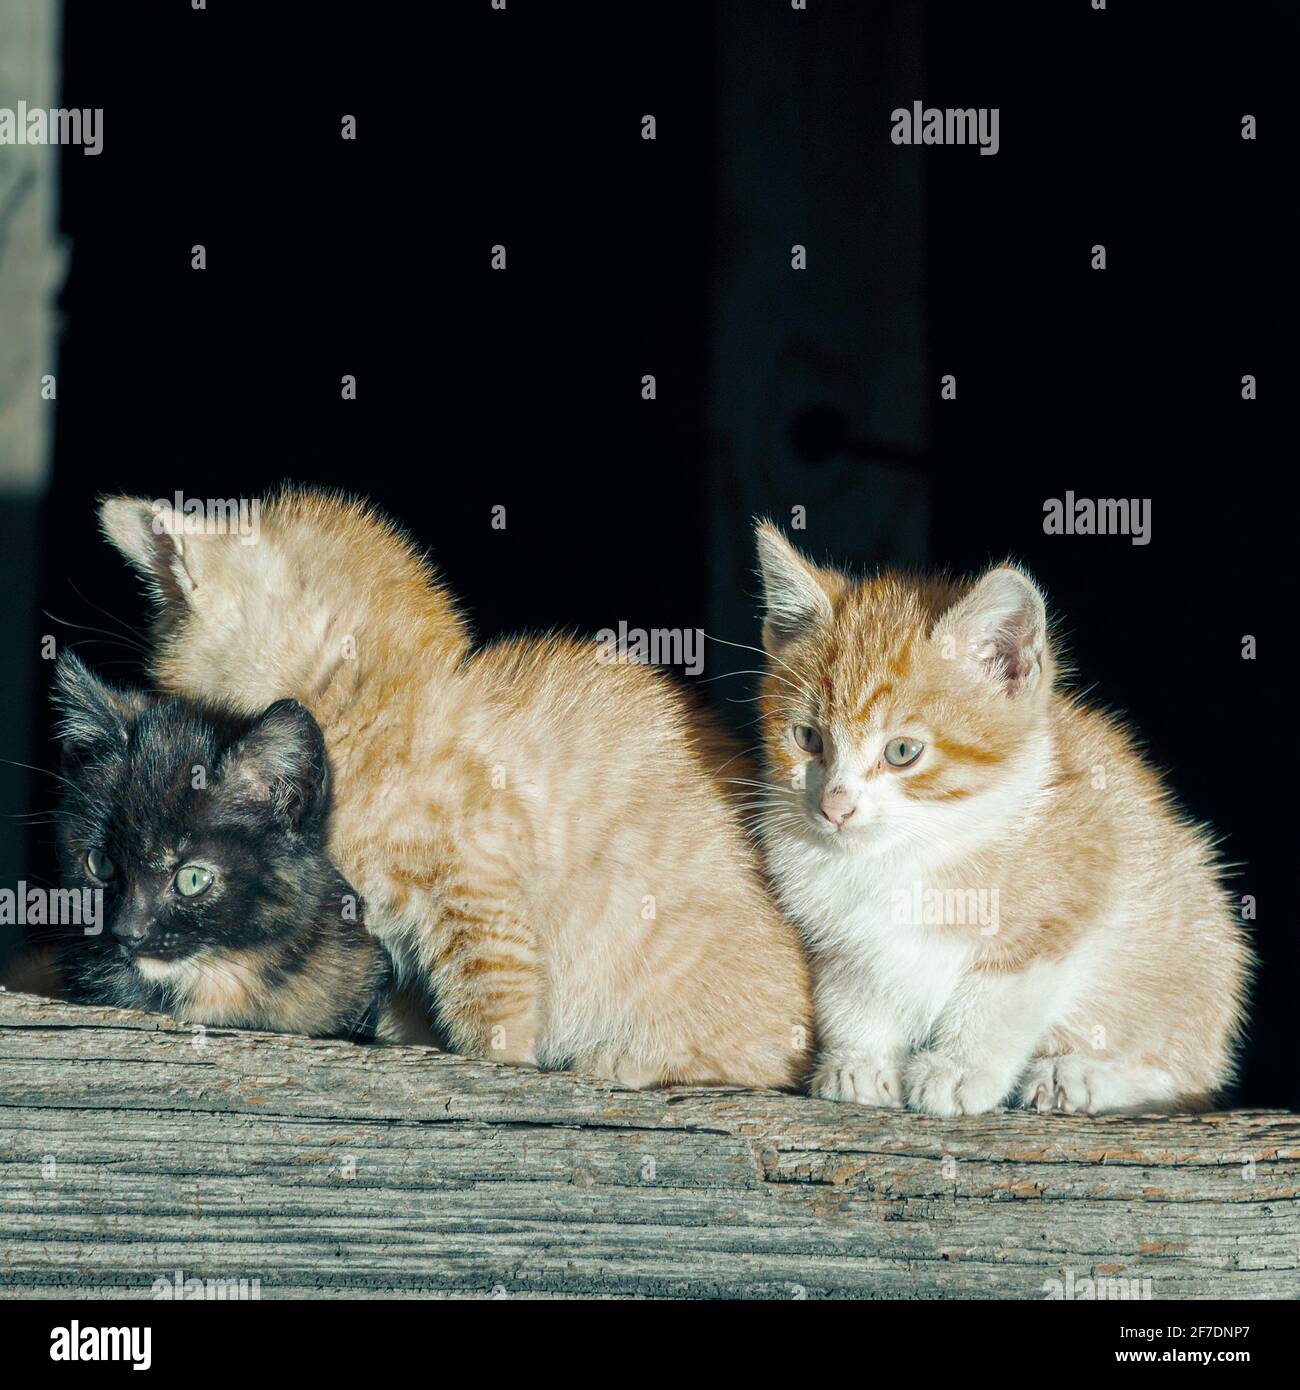 Cats in a town in the council of Aller in Asturias, Spain. In the photograph there are three cats, two orange and white cats and a black cat. The cats Stock Photo